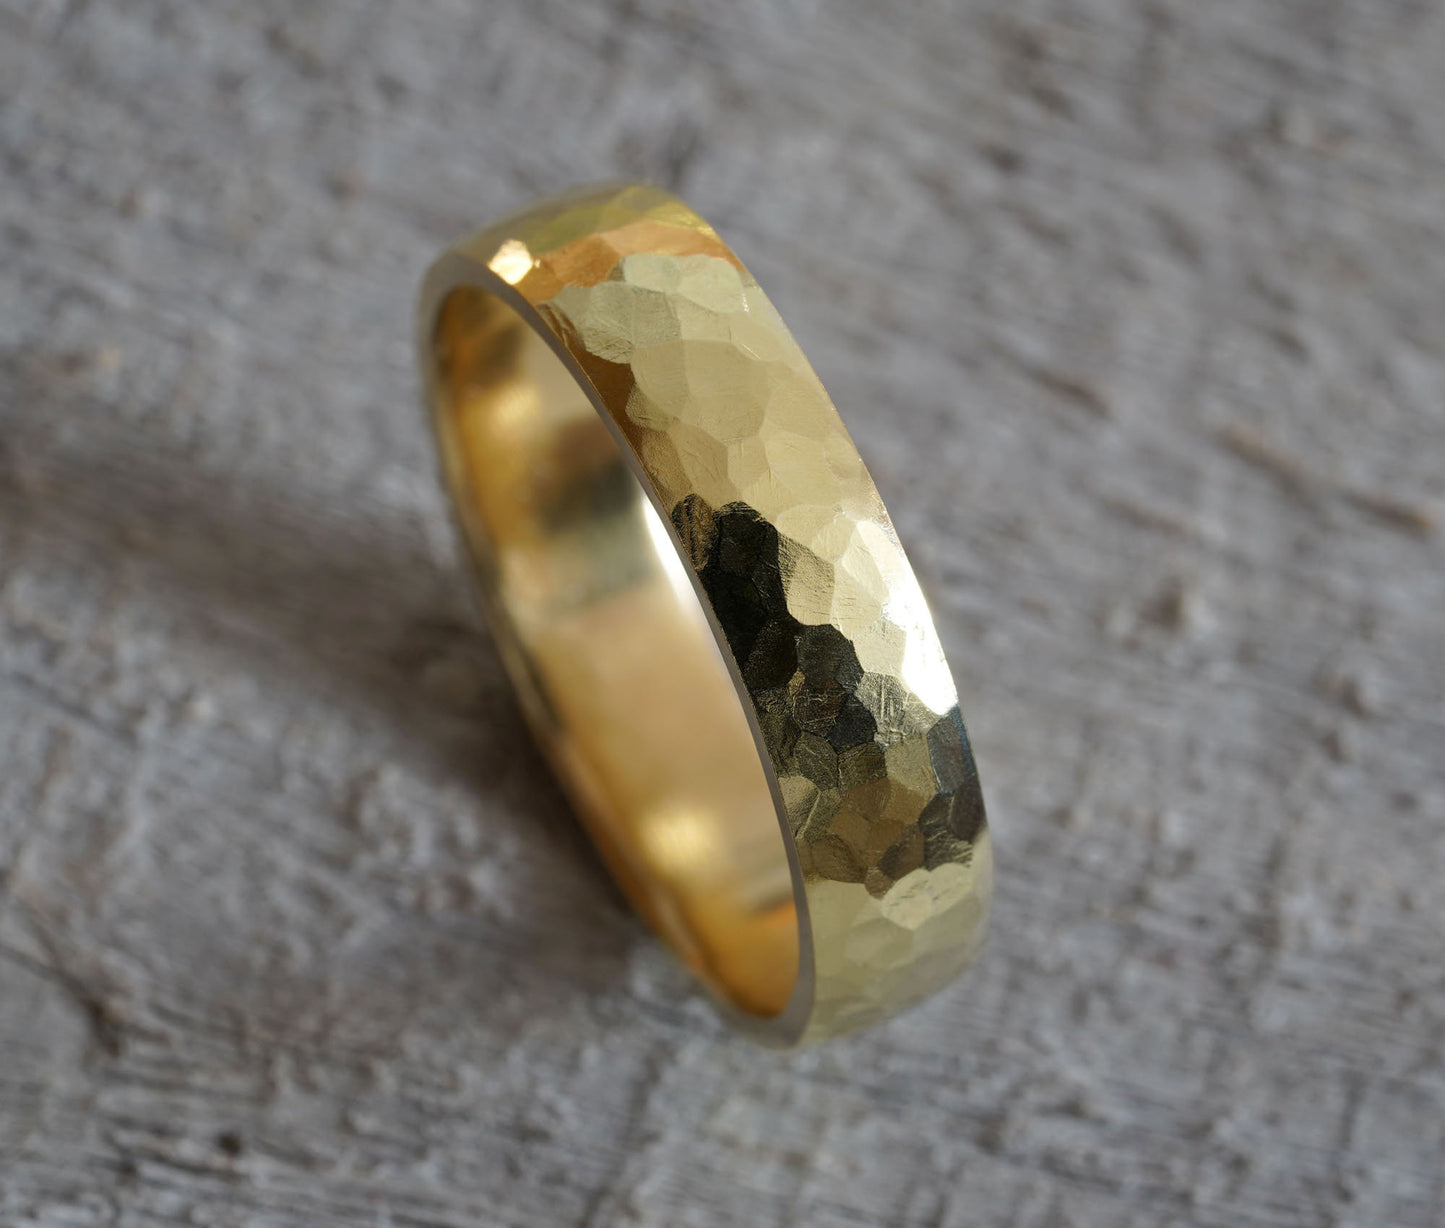 Hammered effect Wedding Ring in 18k Yellow Gold, Rustic Wedding Band, 18K Yellow Gold Wedding Ring, Made to Order